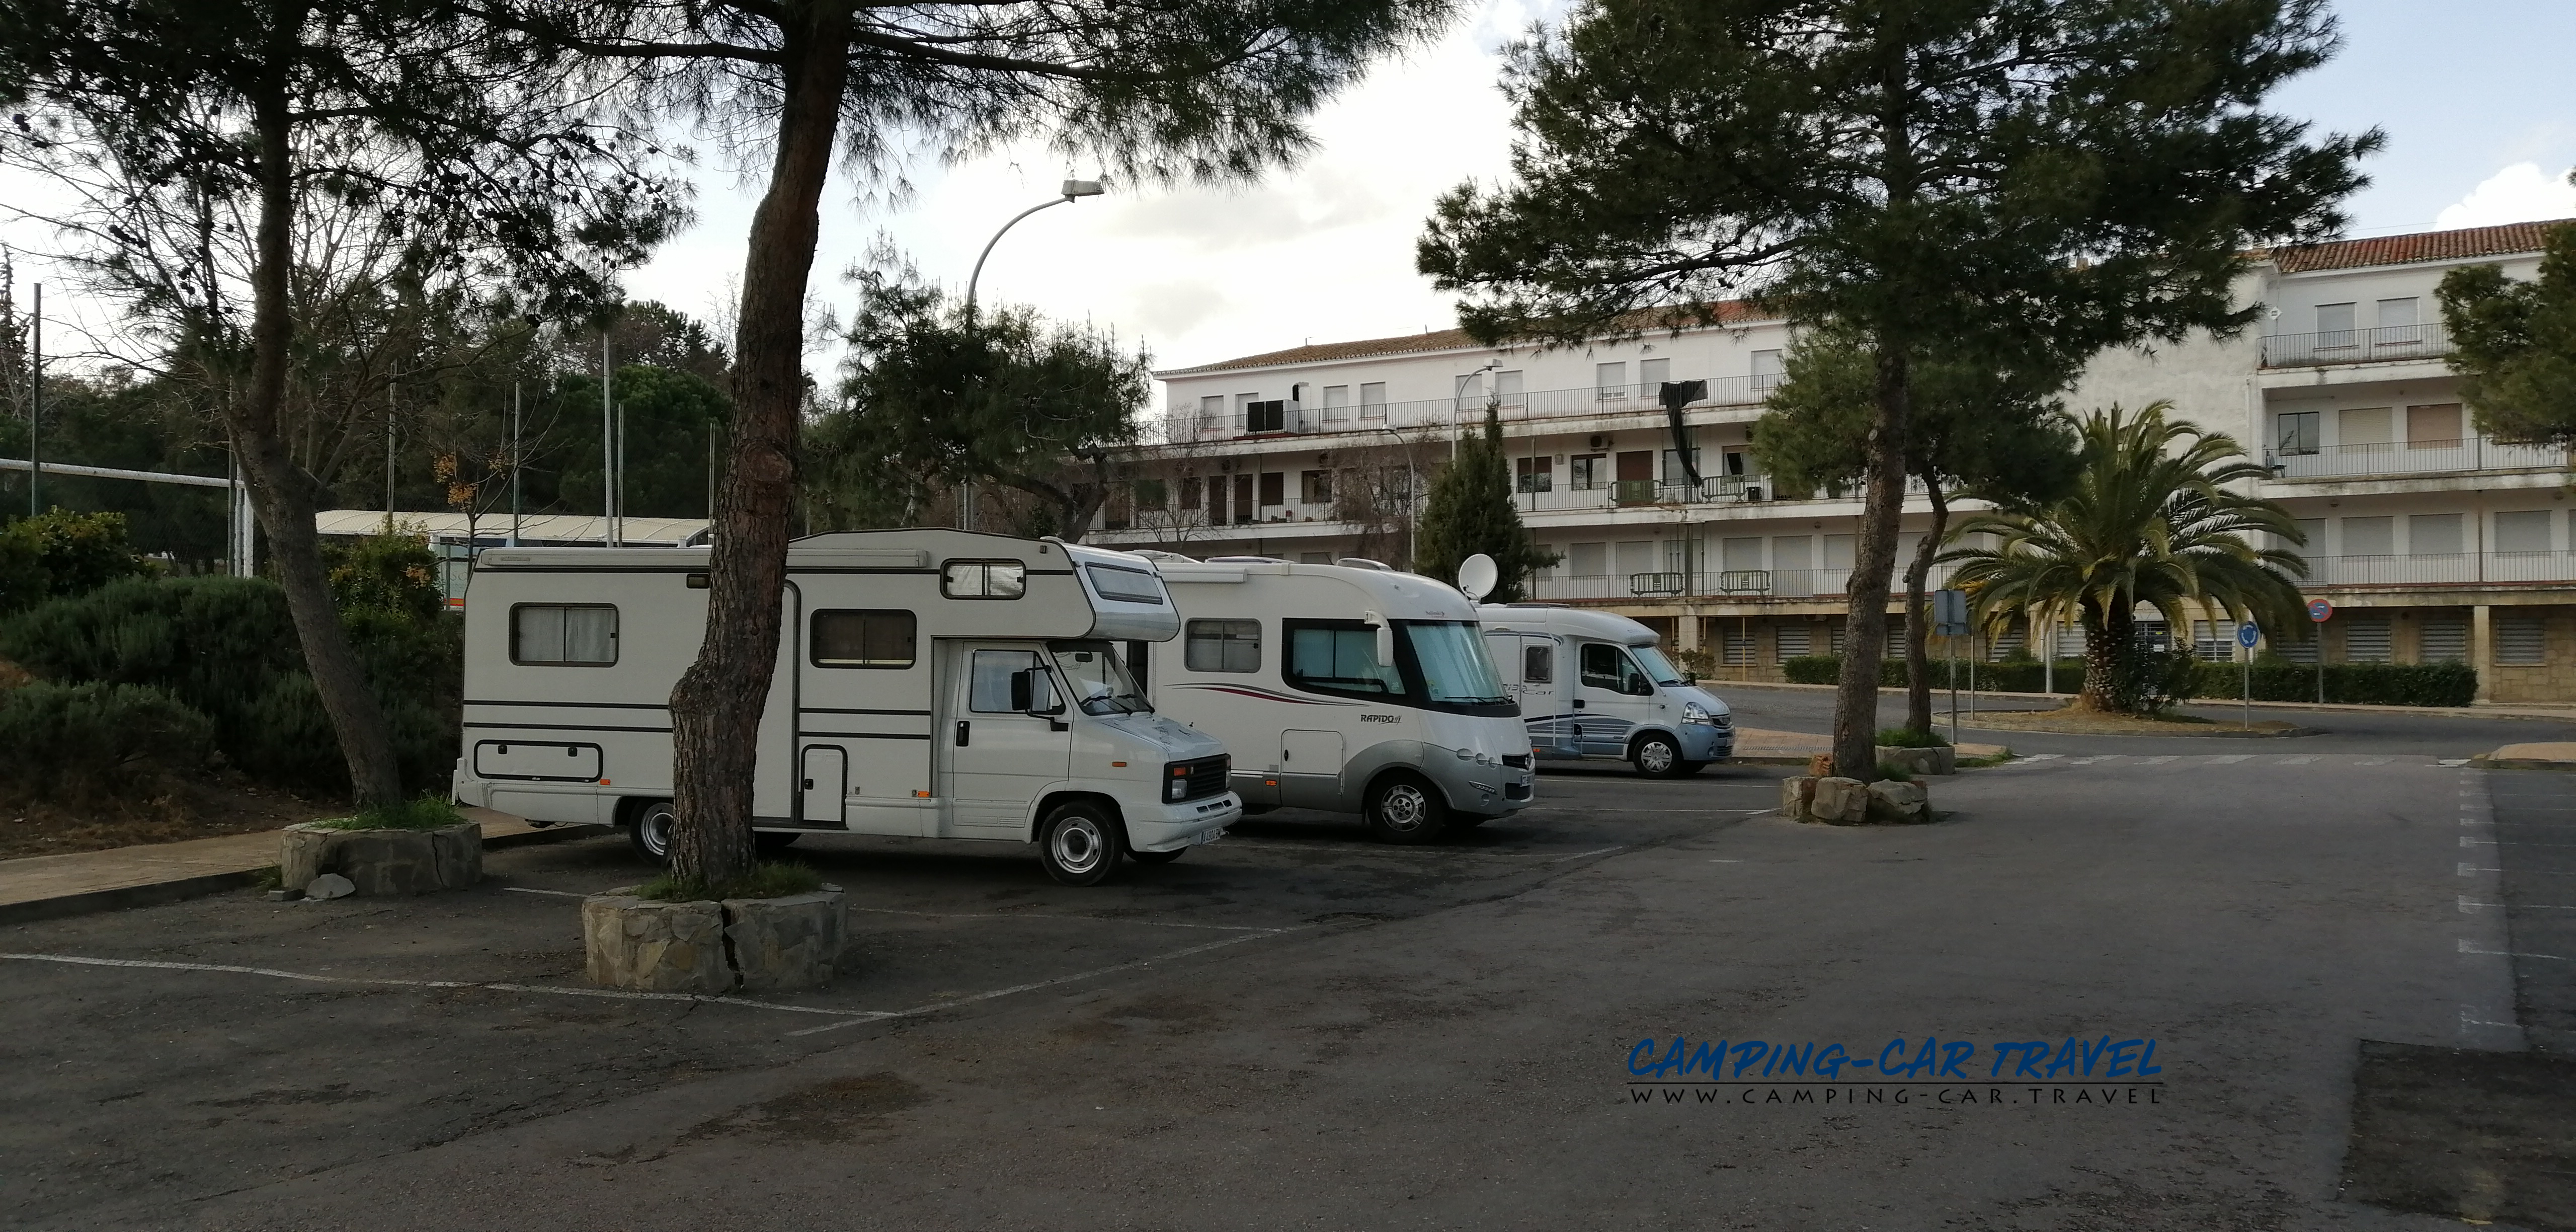 aire services camping car Caceres Espagne Spain